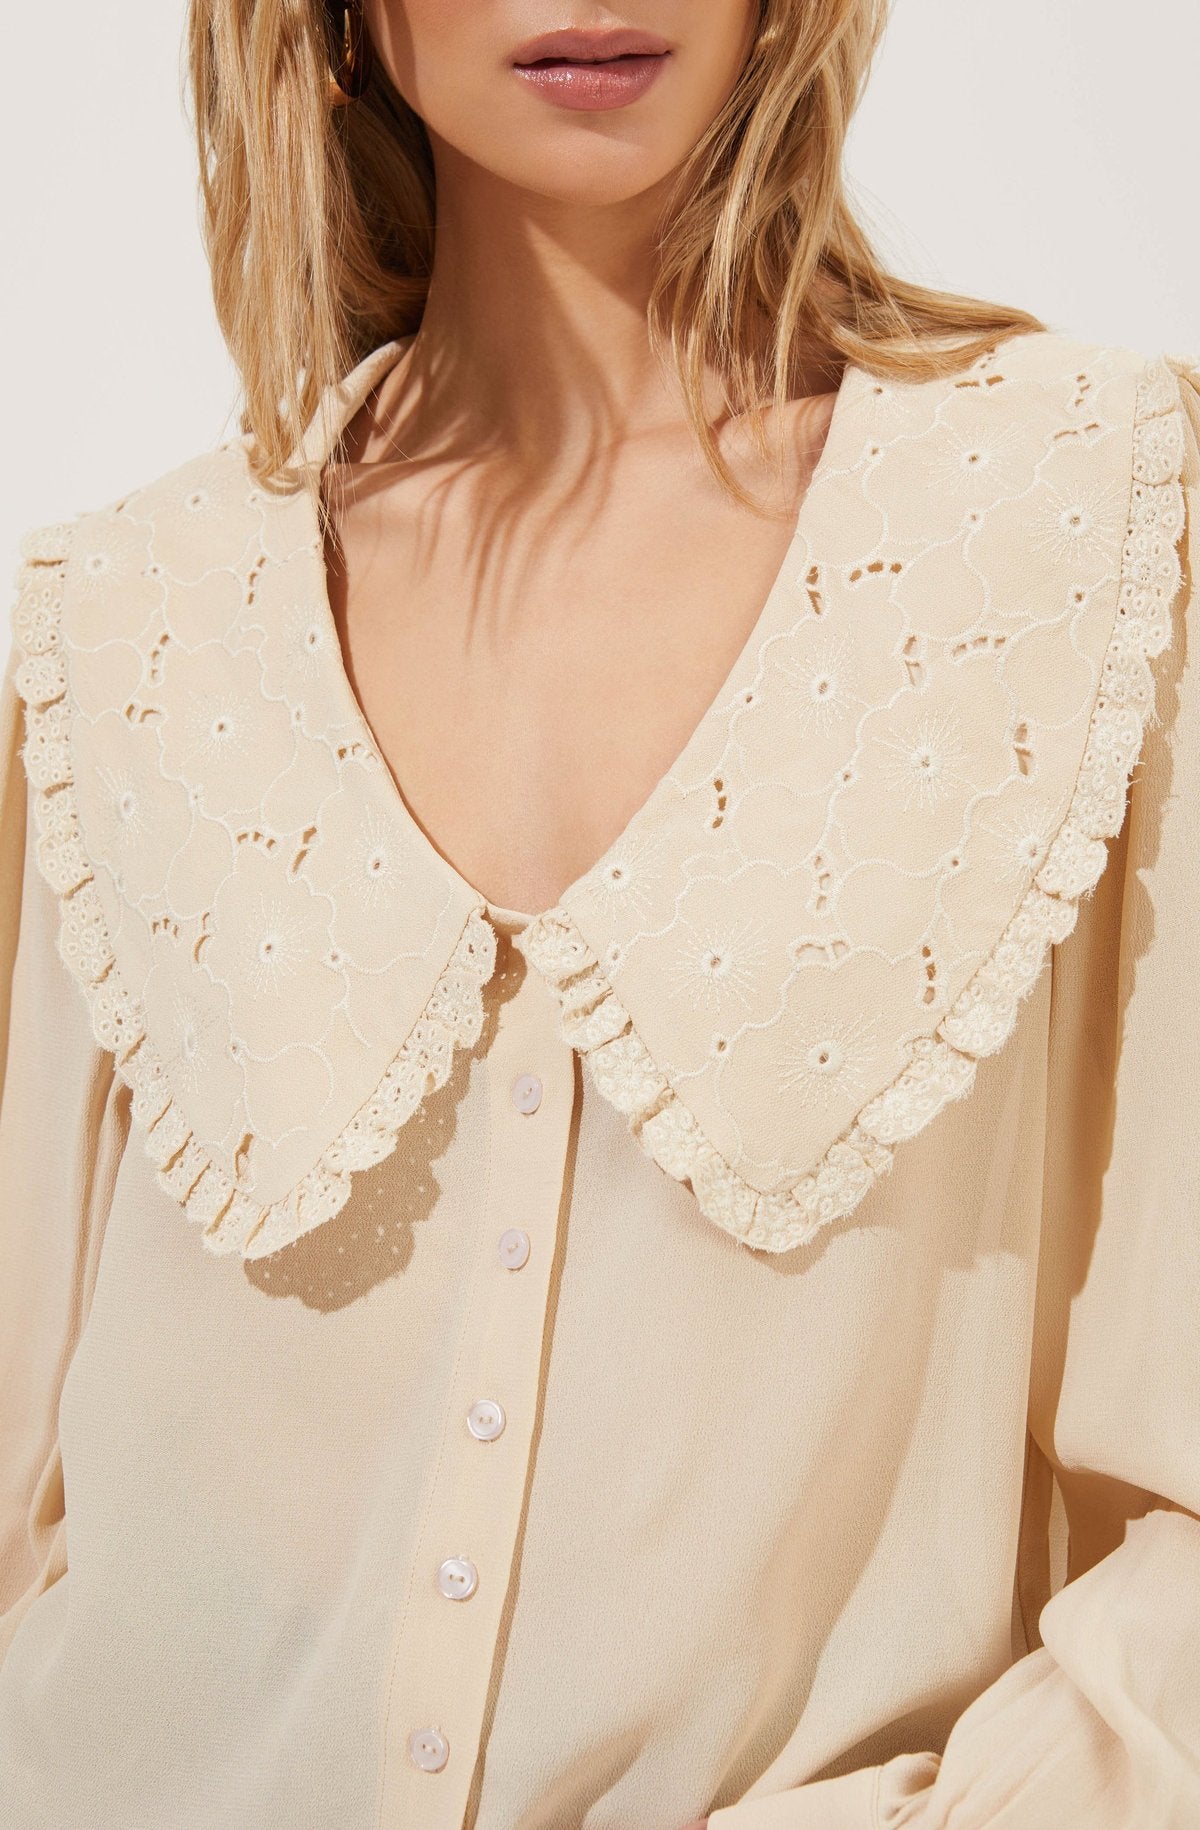 Evelyn Frilly Collar Button Down